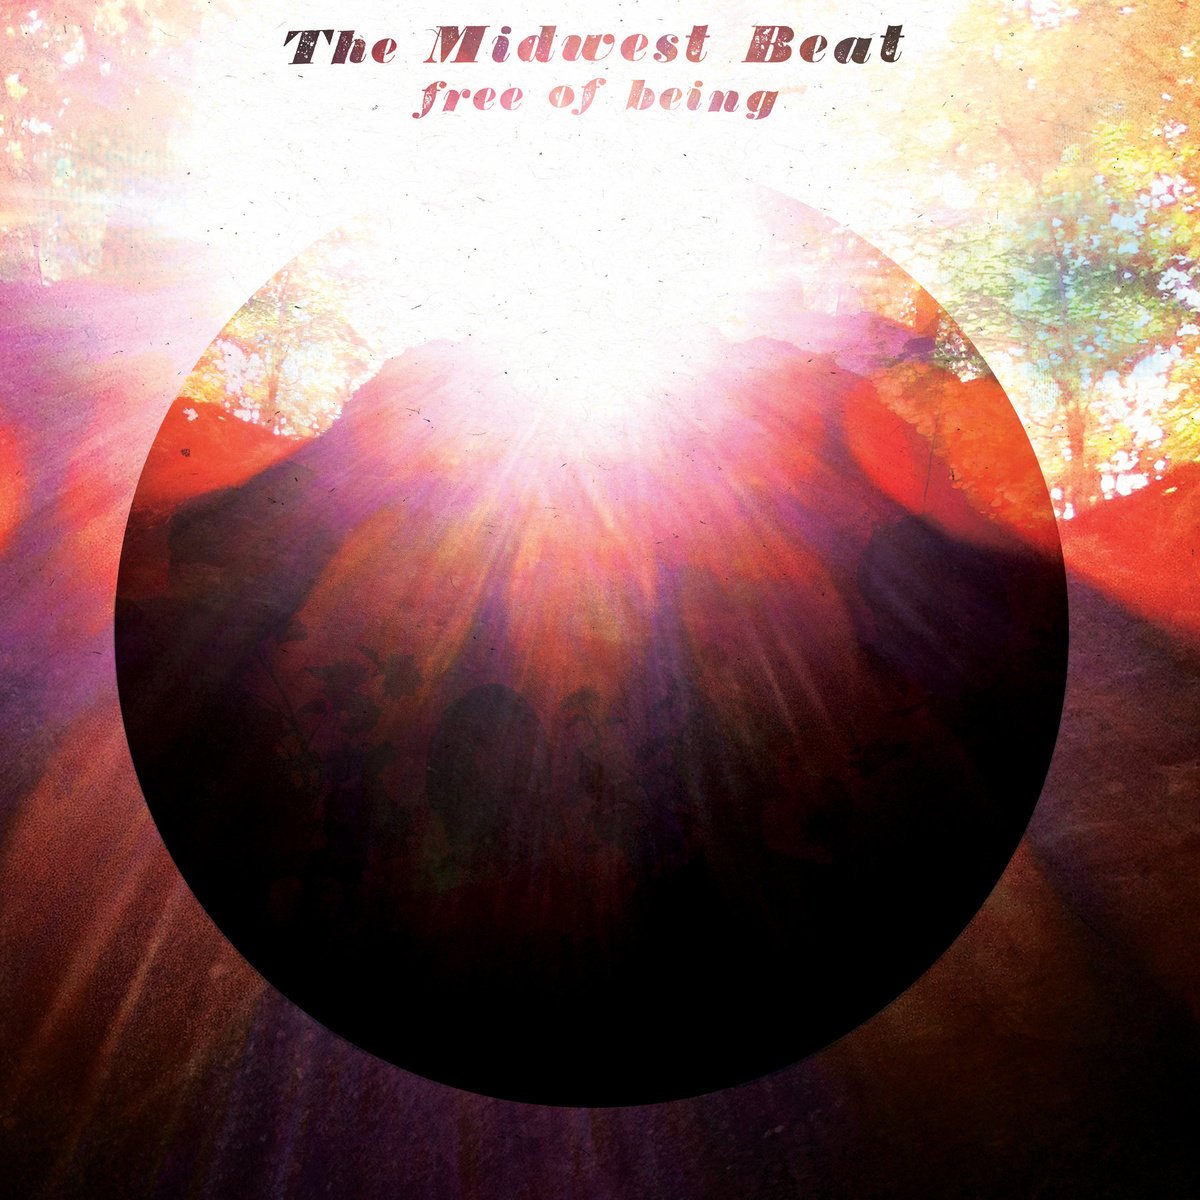 Image of The Midwest Beat - Free of being (Wild Honey Records) LP